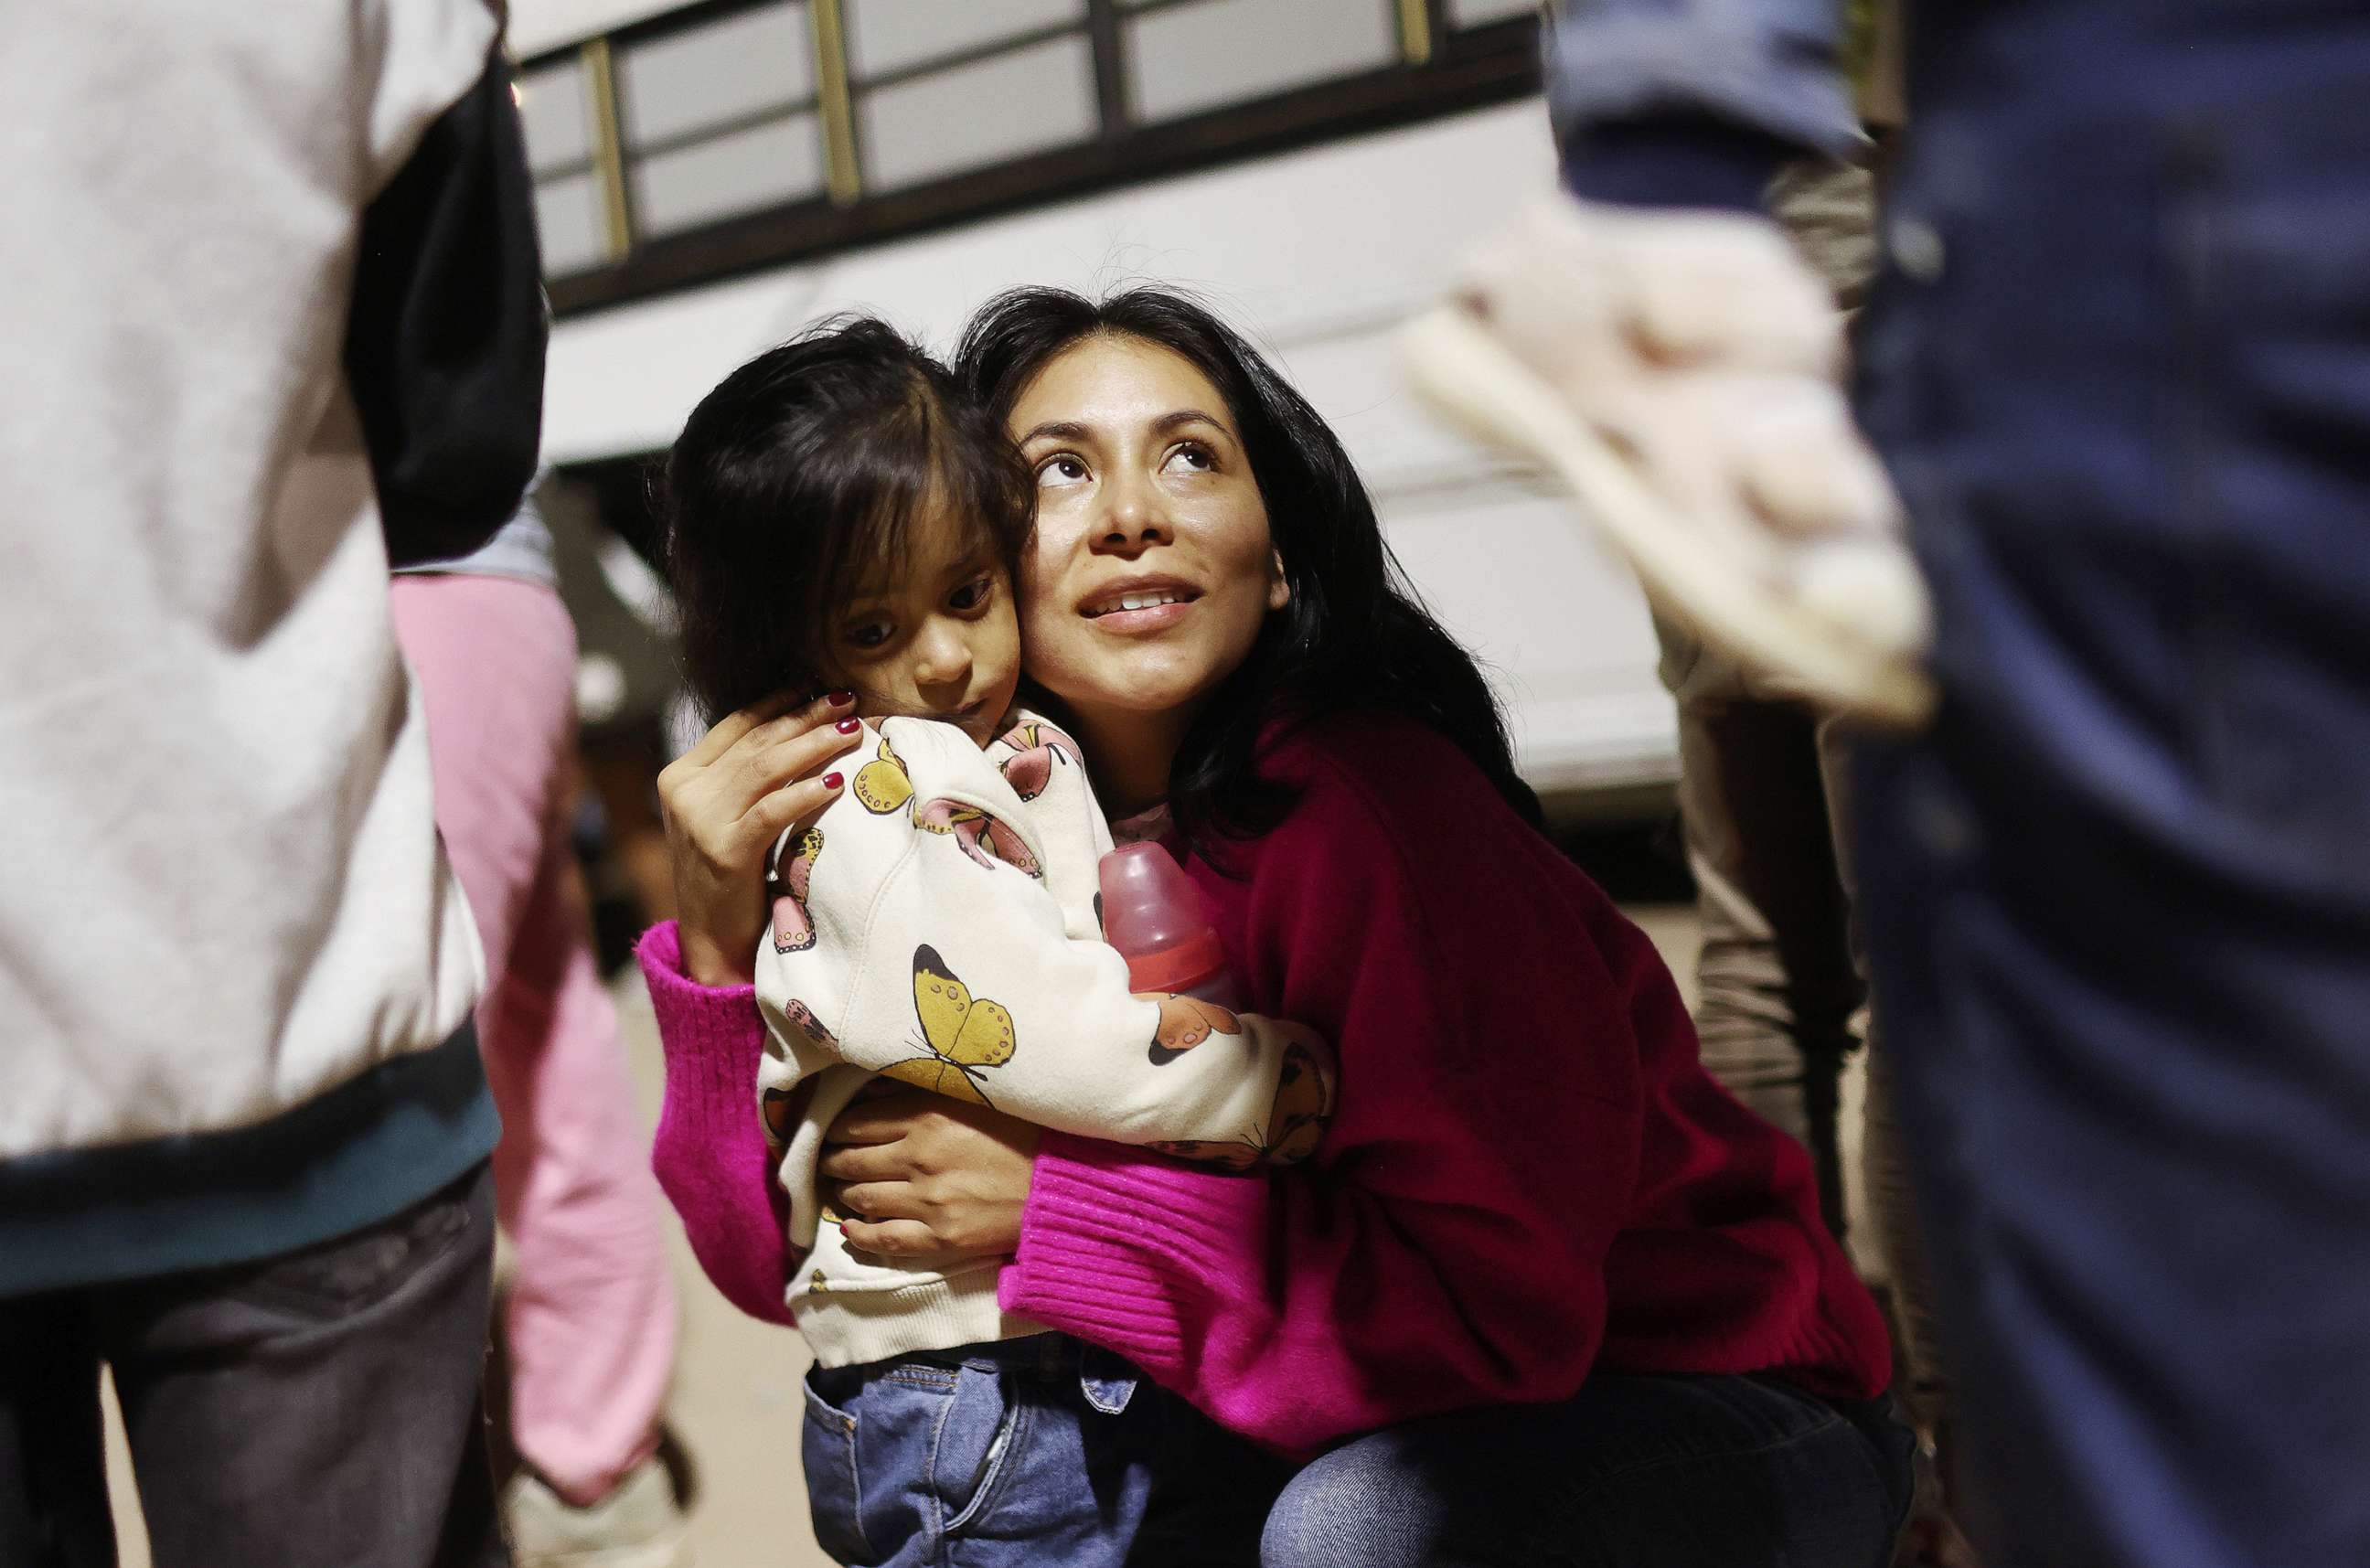 PHOTO: Peruvian immigrant family members, who are seeking asylum in the United States, embrace as they wait to board a bus during processing by U.S. Border Patrol agents after crossing into Arizona from Mexico on May 11, 2023 in Yuma, Ariz.